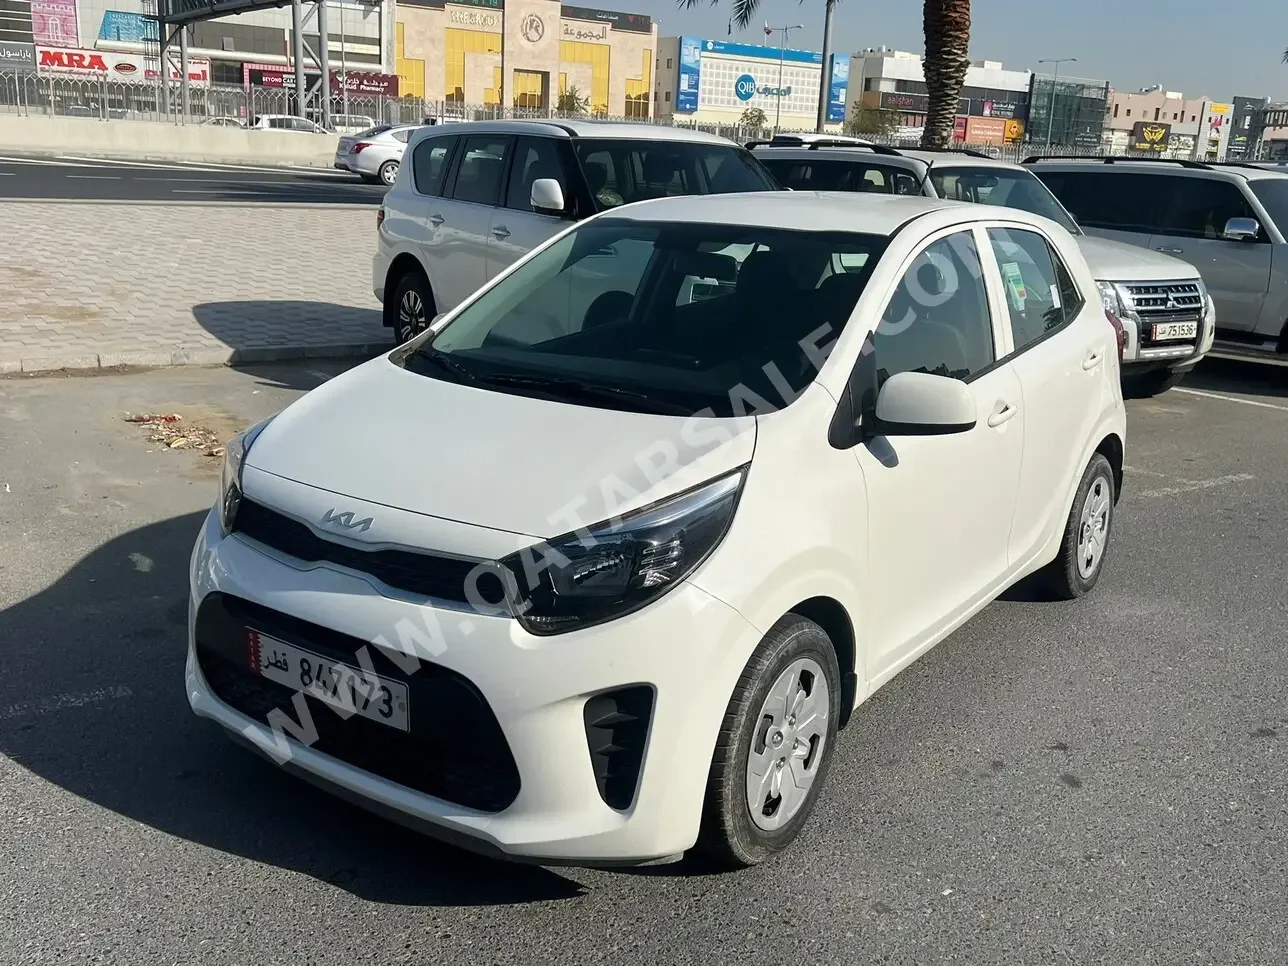 Kia  Picanto  2022  Automatic  33,000 Km  4 Cylinder  Front Wheel Drive (FWD)  Sedan  White  With Warranty